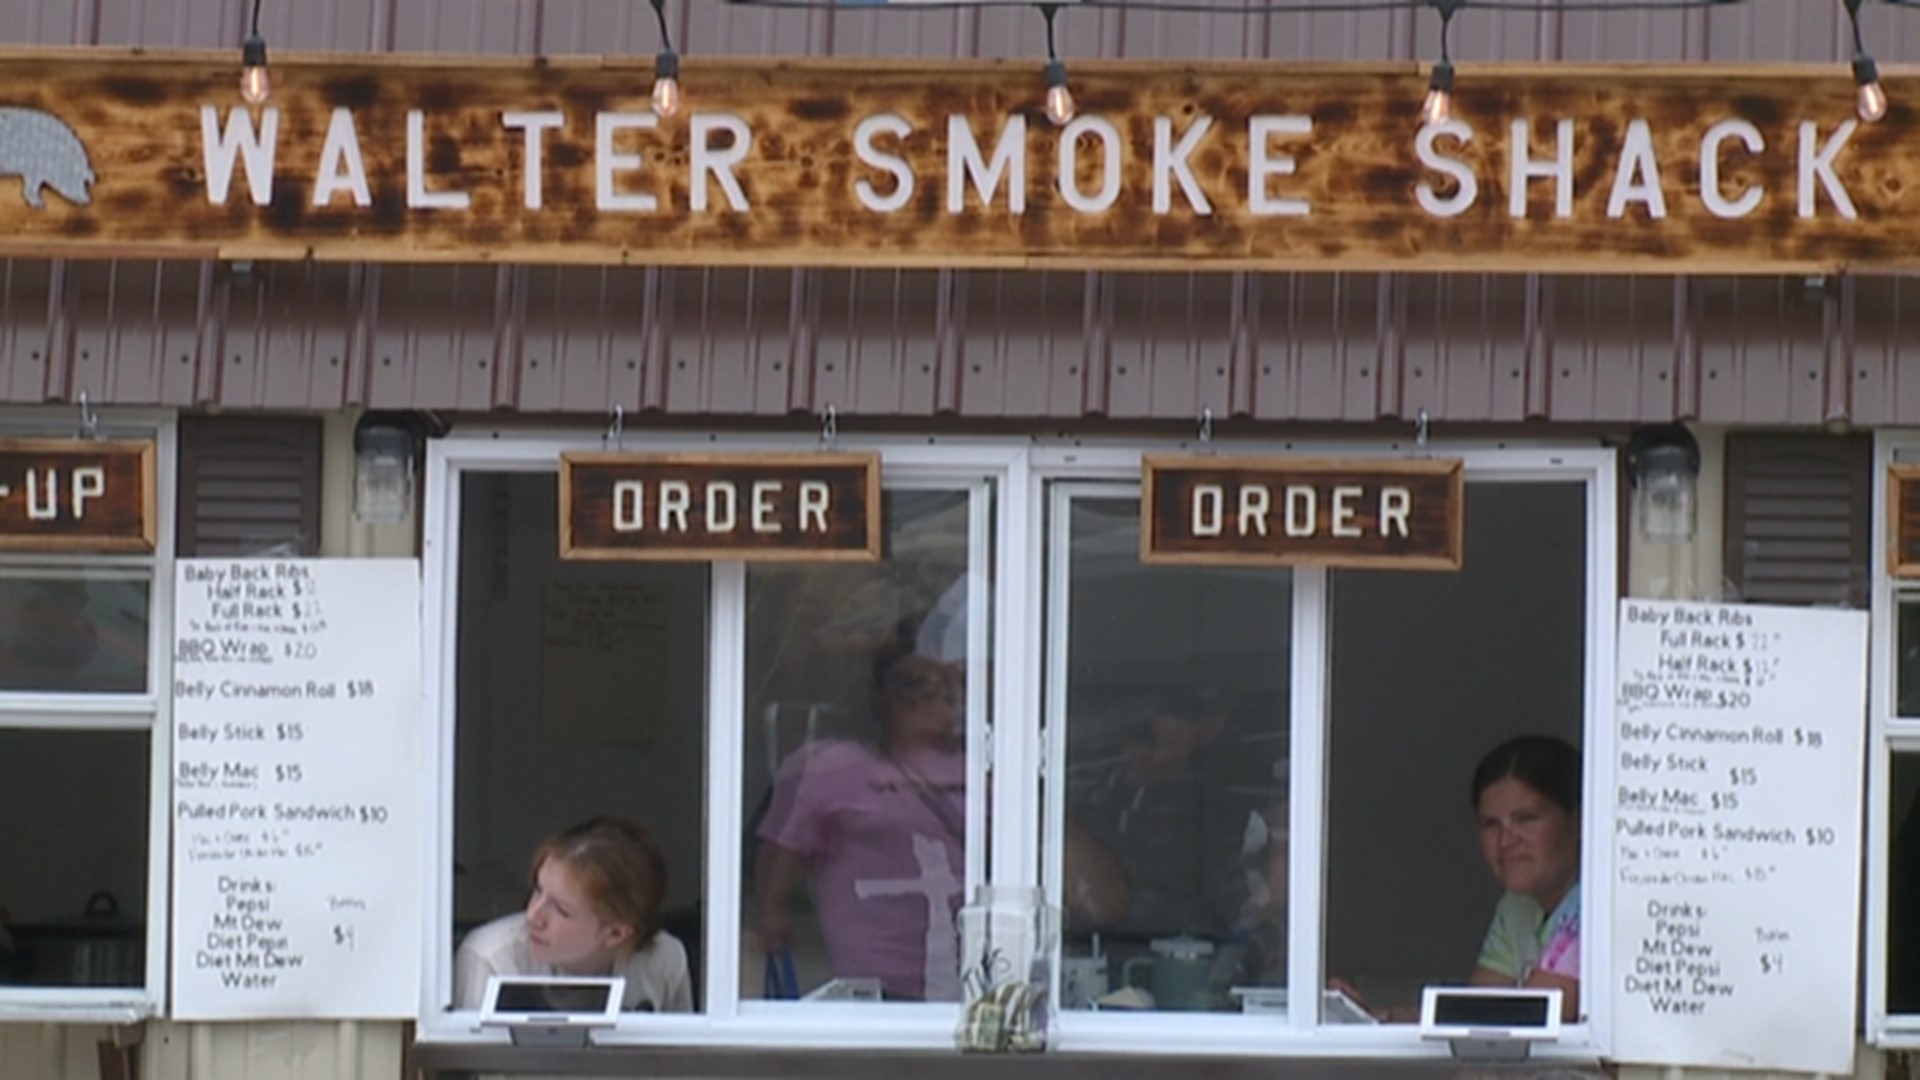 This is the first time Walter Smoke Shack has participated in a fair. The group has only been part of four total food events.